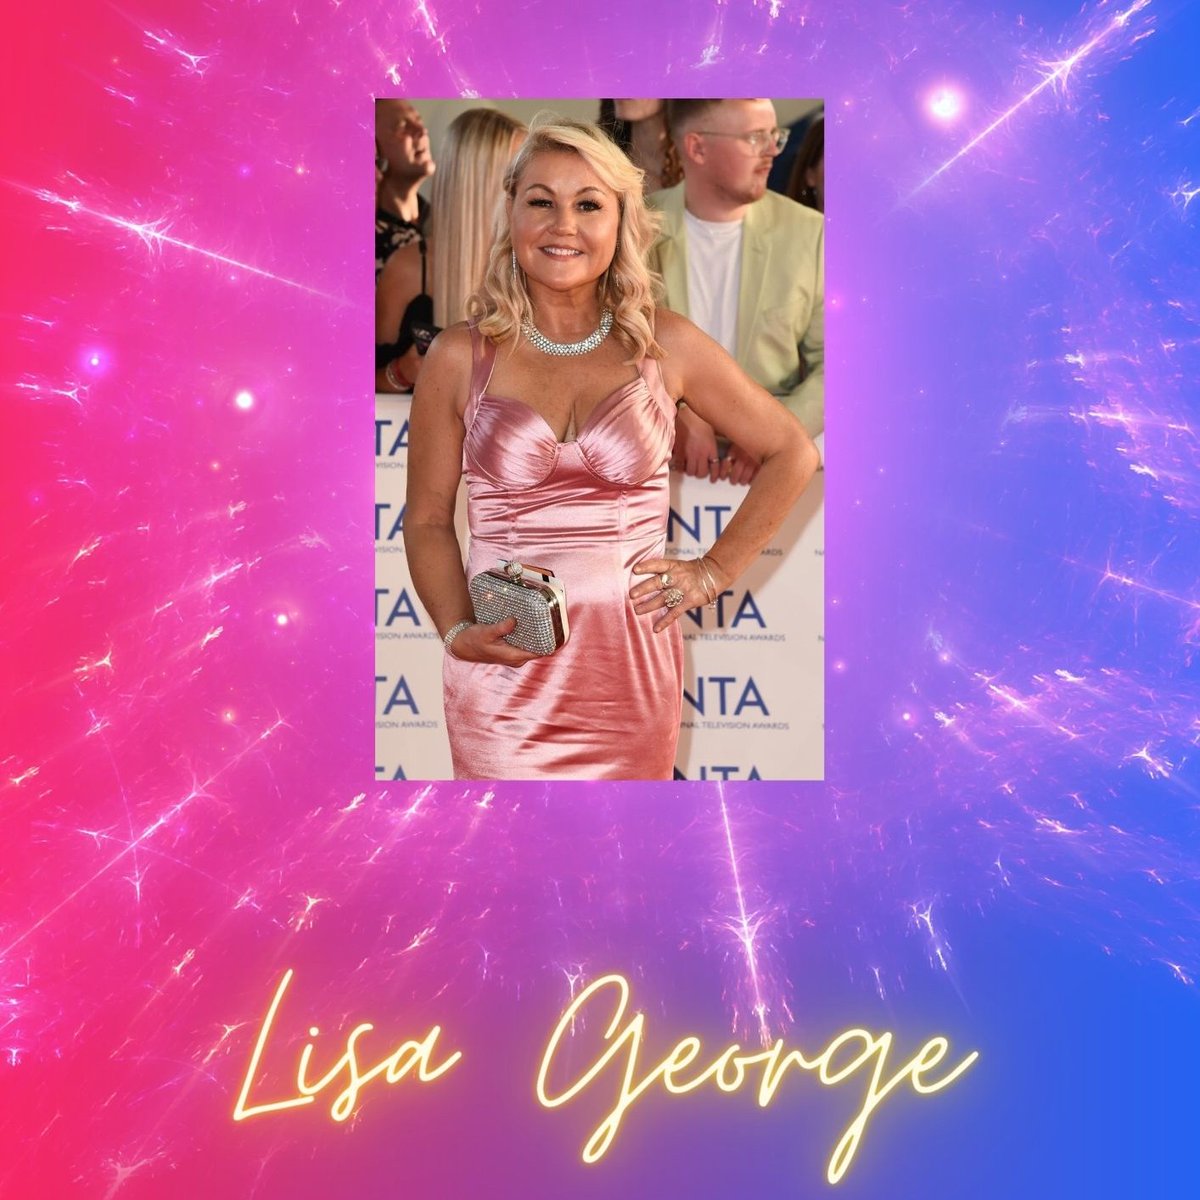 Amazing opportunity for our Performing Arts students who will be having an industry talk and Q and A session with the one and only Lisa George, Star of stage and screen and well known for her role on Coronation Street. 24th January, 1pm in the Arts Theatre.